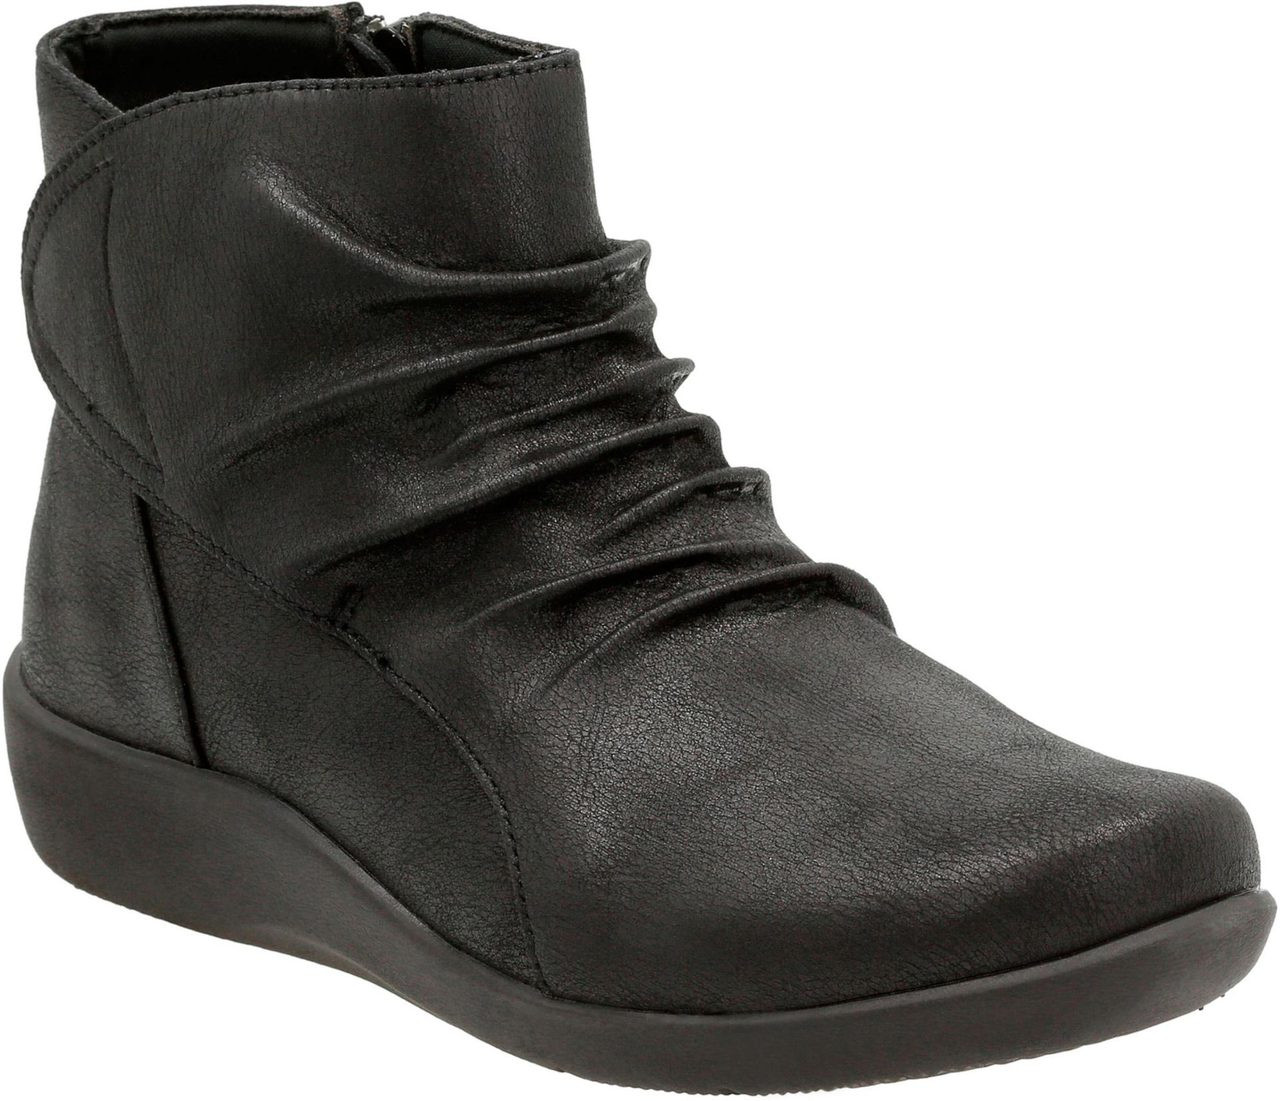 Clarks Women's Sillian Chell - FREE Shipping & FREE Returns - Ankle ...